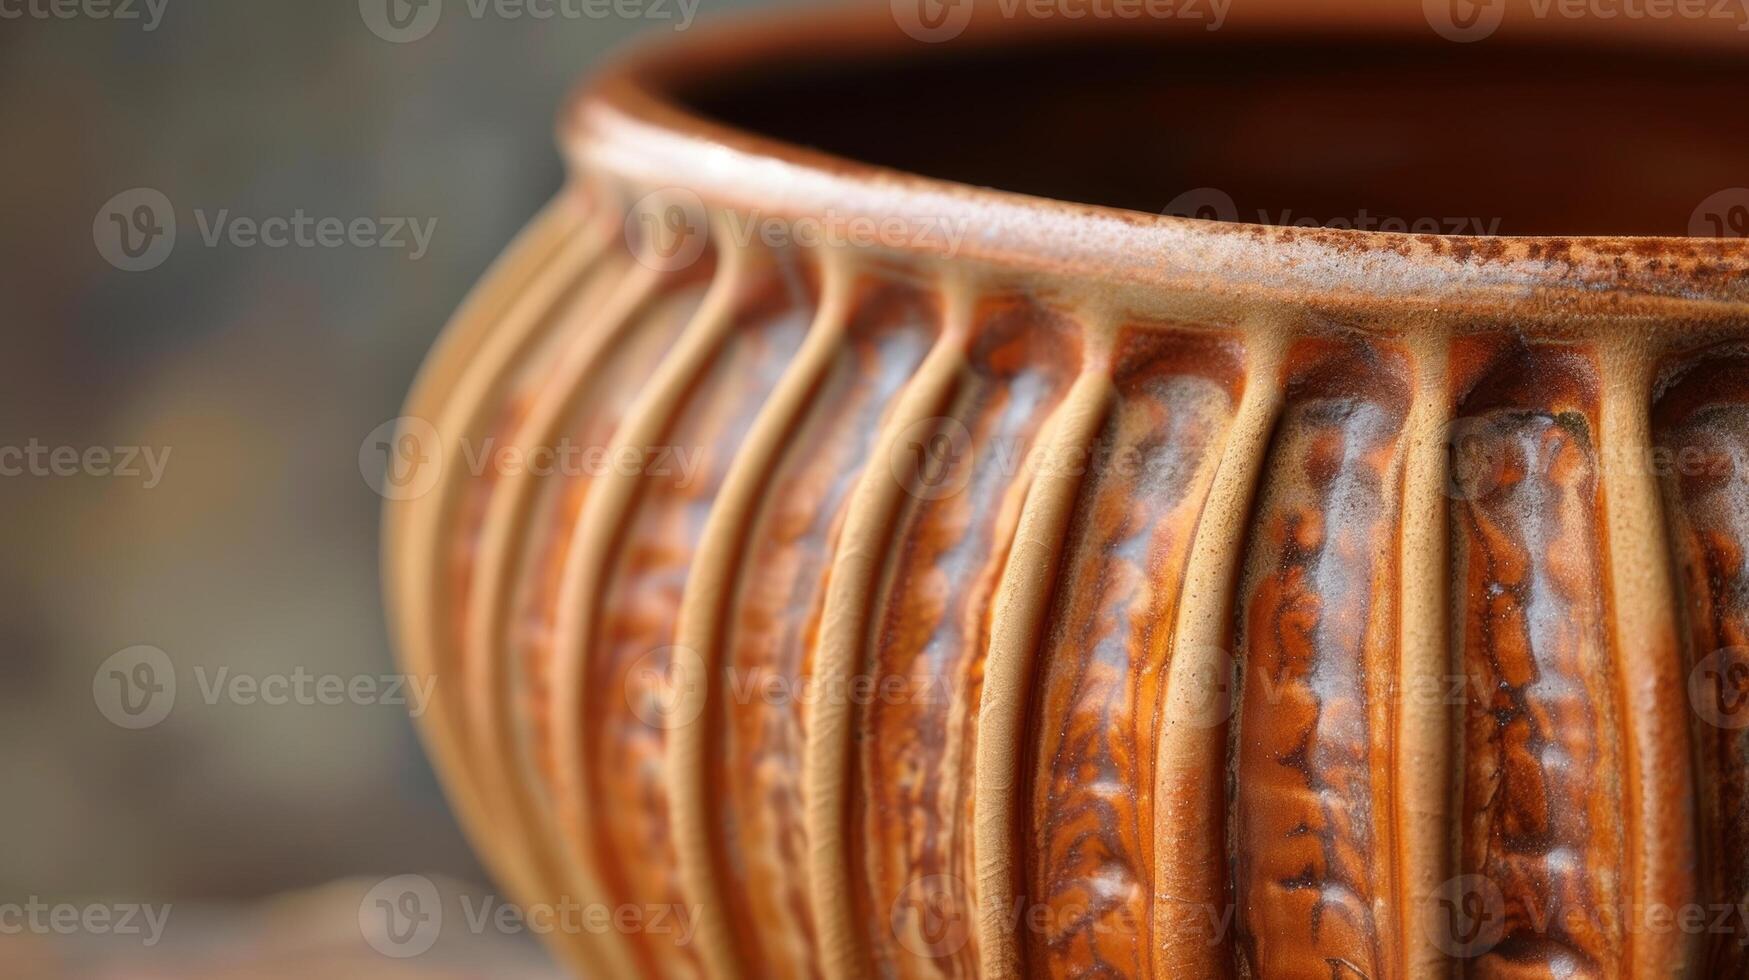 The versatility of fluting allows for endless possibilities from creating classic traditional designs to experimenting and pushing the boundaries of potterymaking. photo